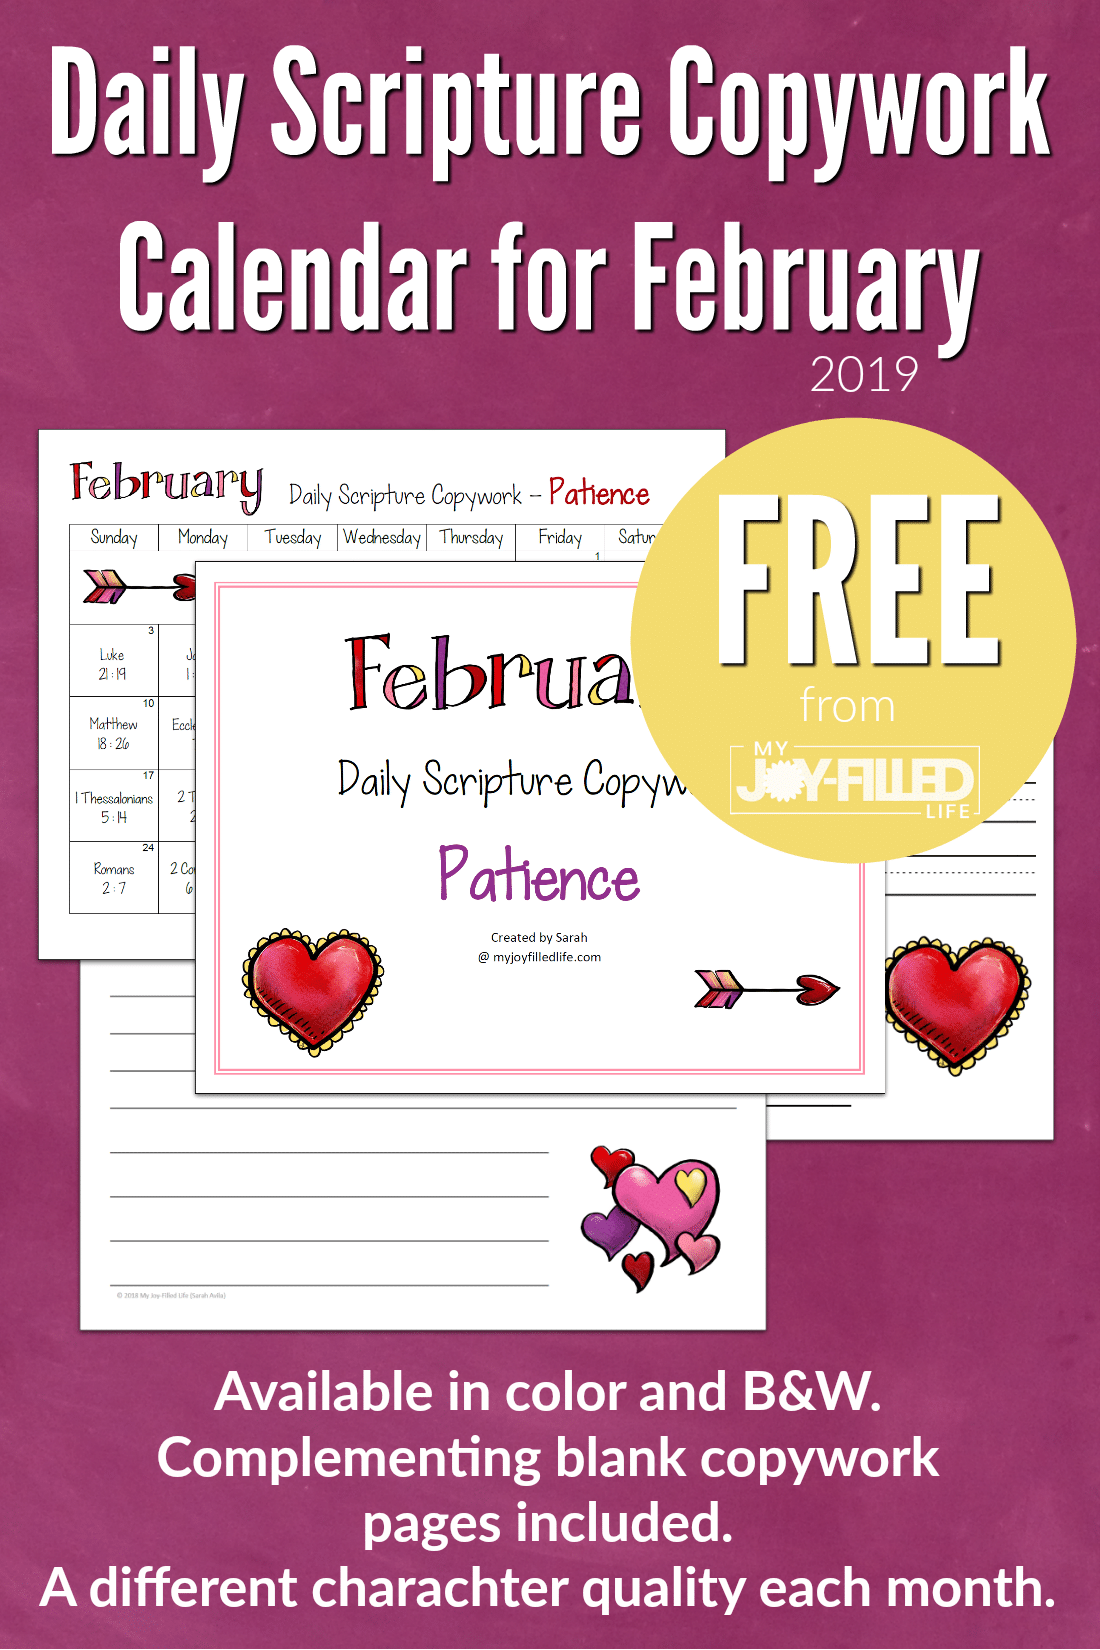 Printable scripture copywork calendar for February with the focus on PATIENCE. Includes complementing blank copywork sheets. Comes in color and B&W. #copywork #scripture #charactercopywork #freeprintable #homeschoolfreebie